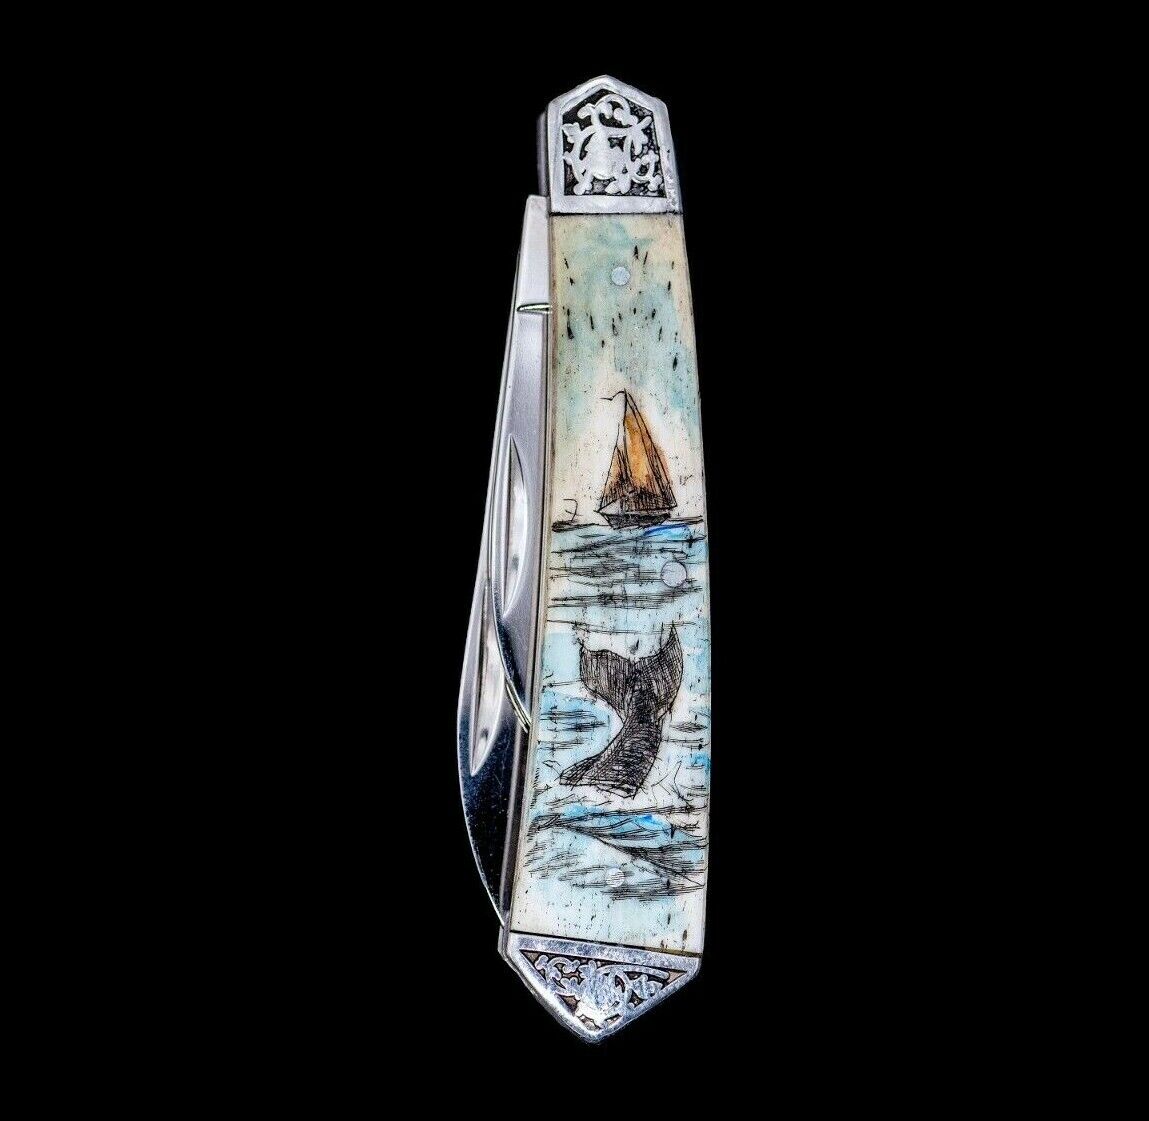 Ship and Whale Vertical Scrimshaw Collection Large Dual Blade Pocket Knife